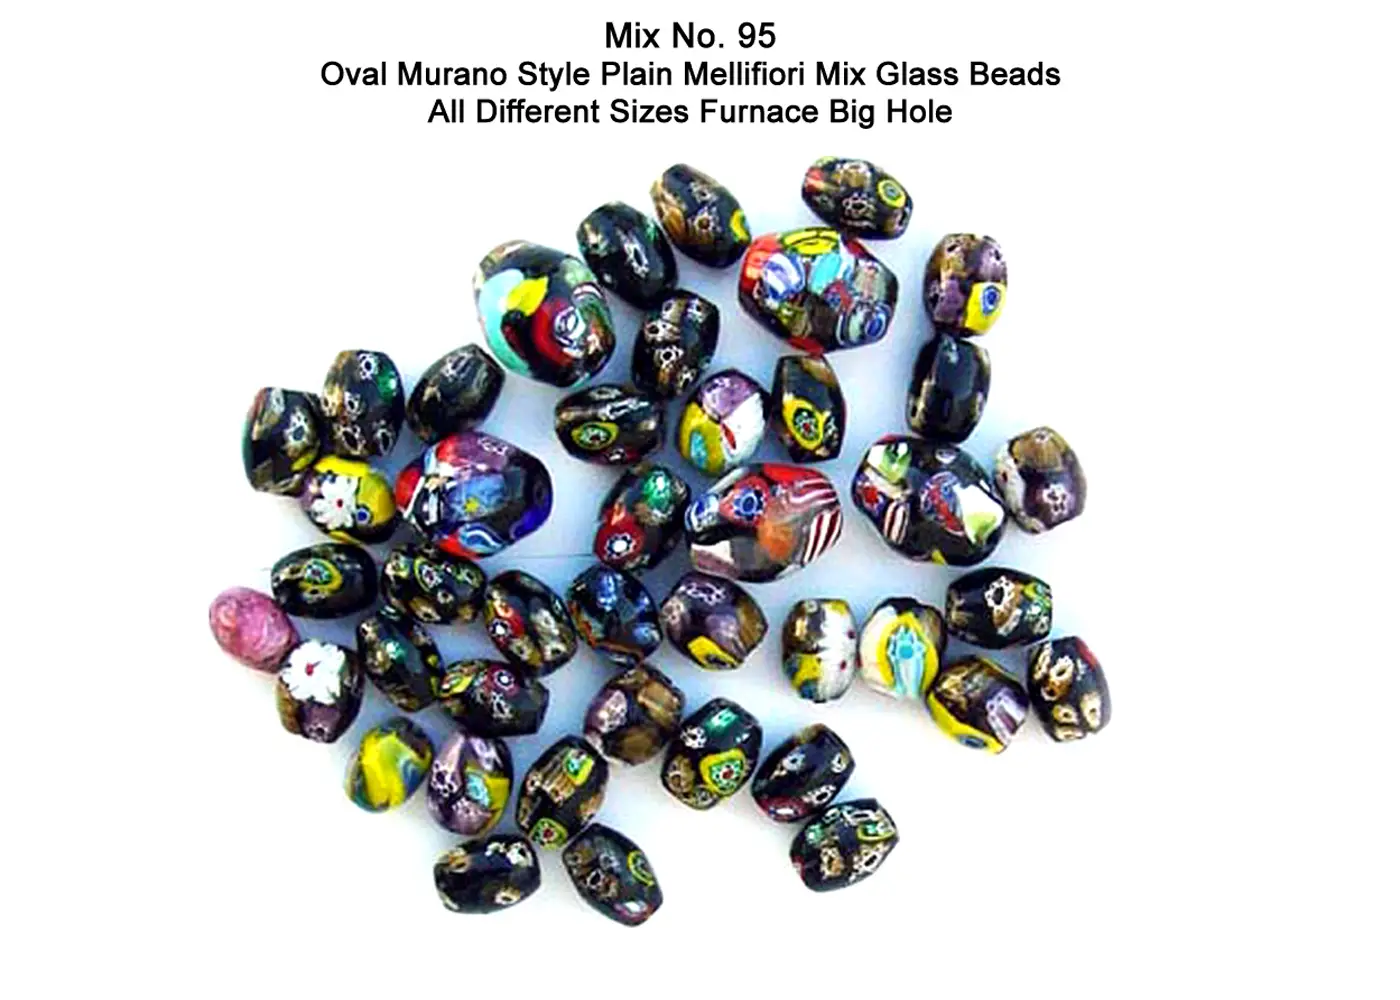 Oval Murano style plain Mellifiori mix glass beads all different size furnace big hole